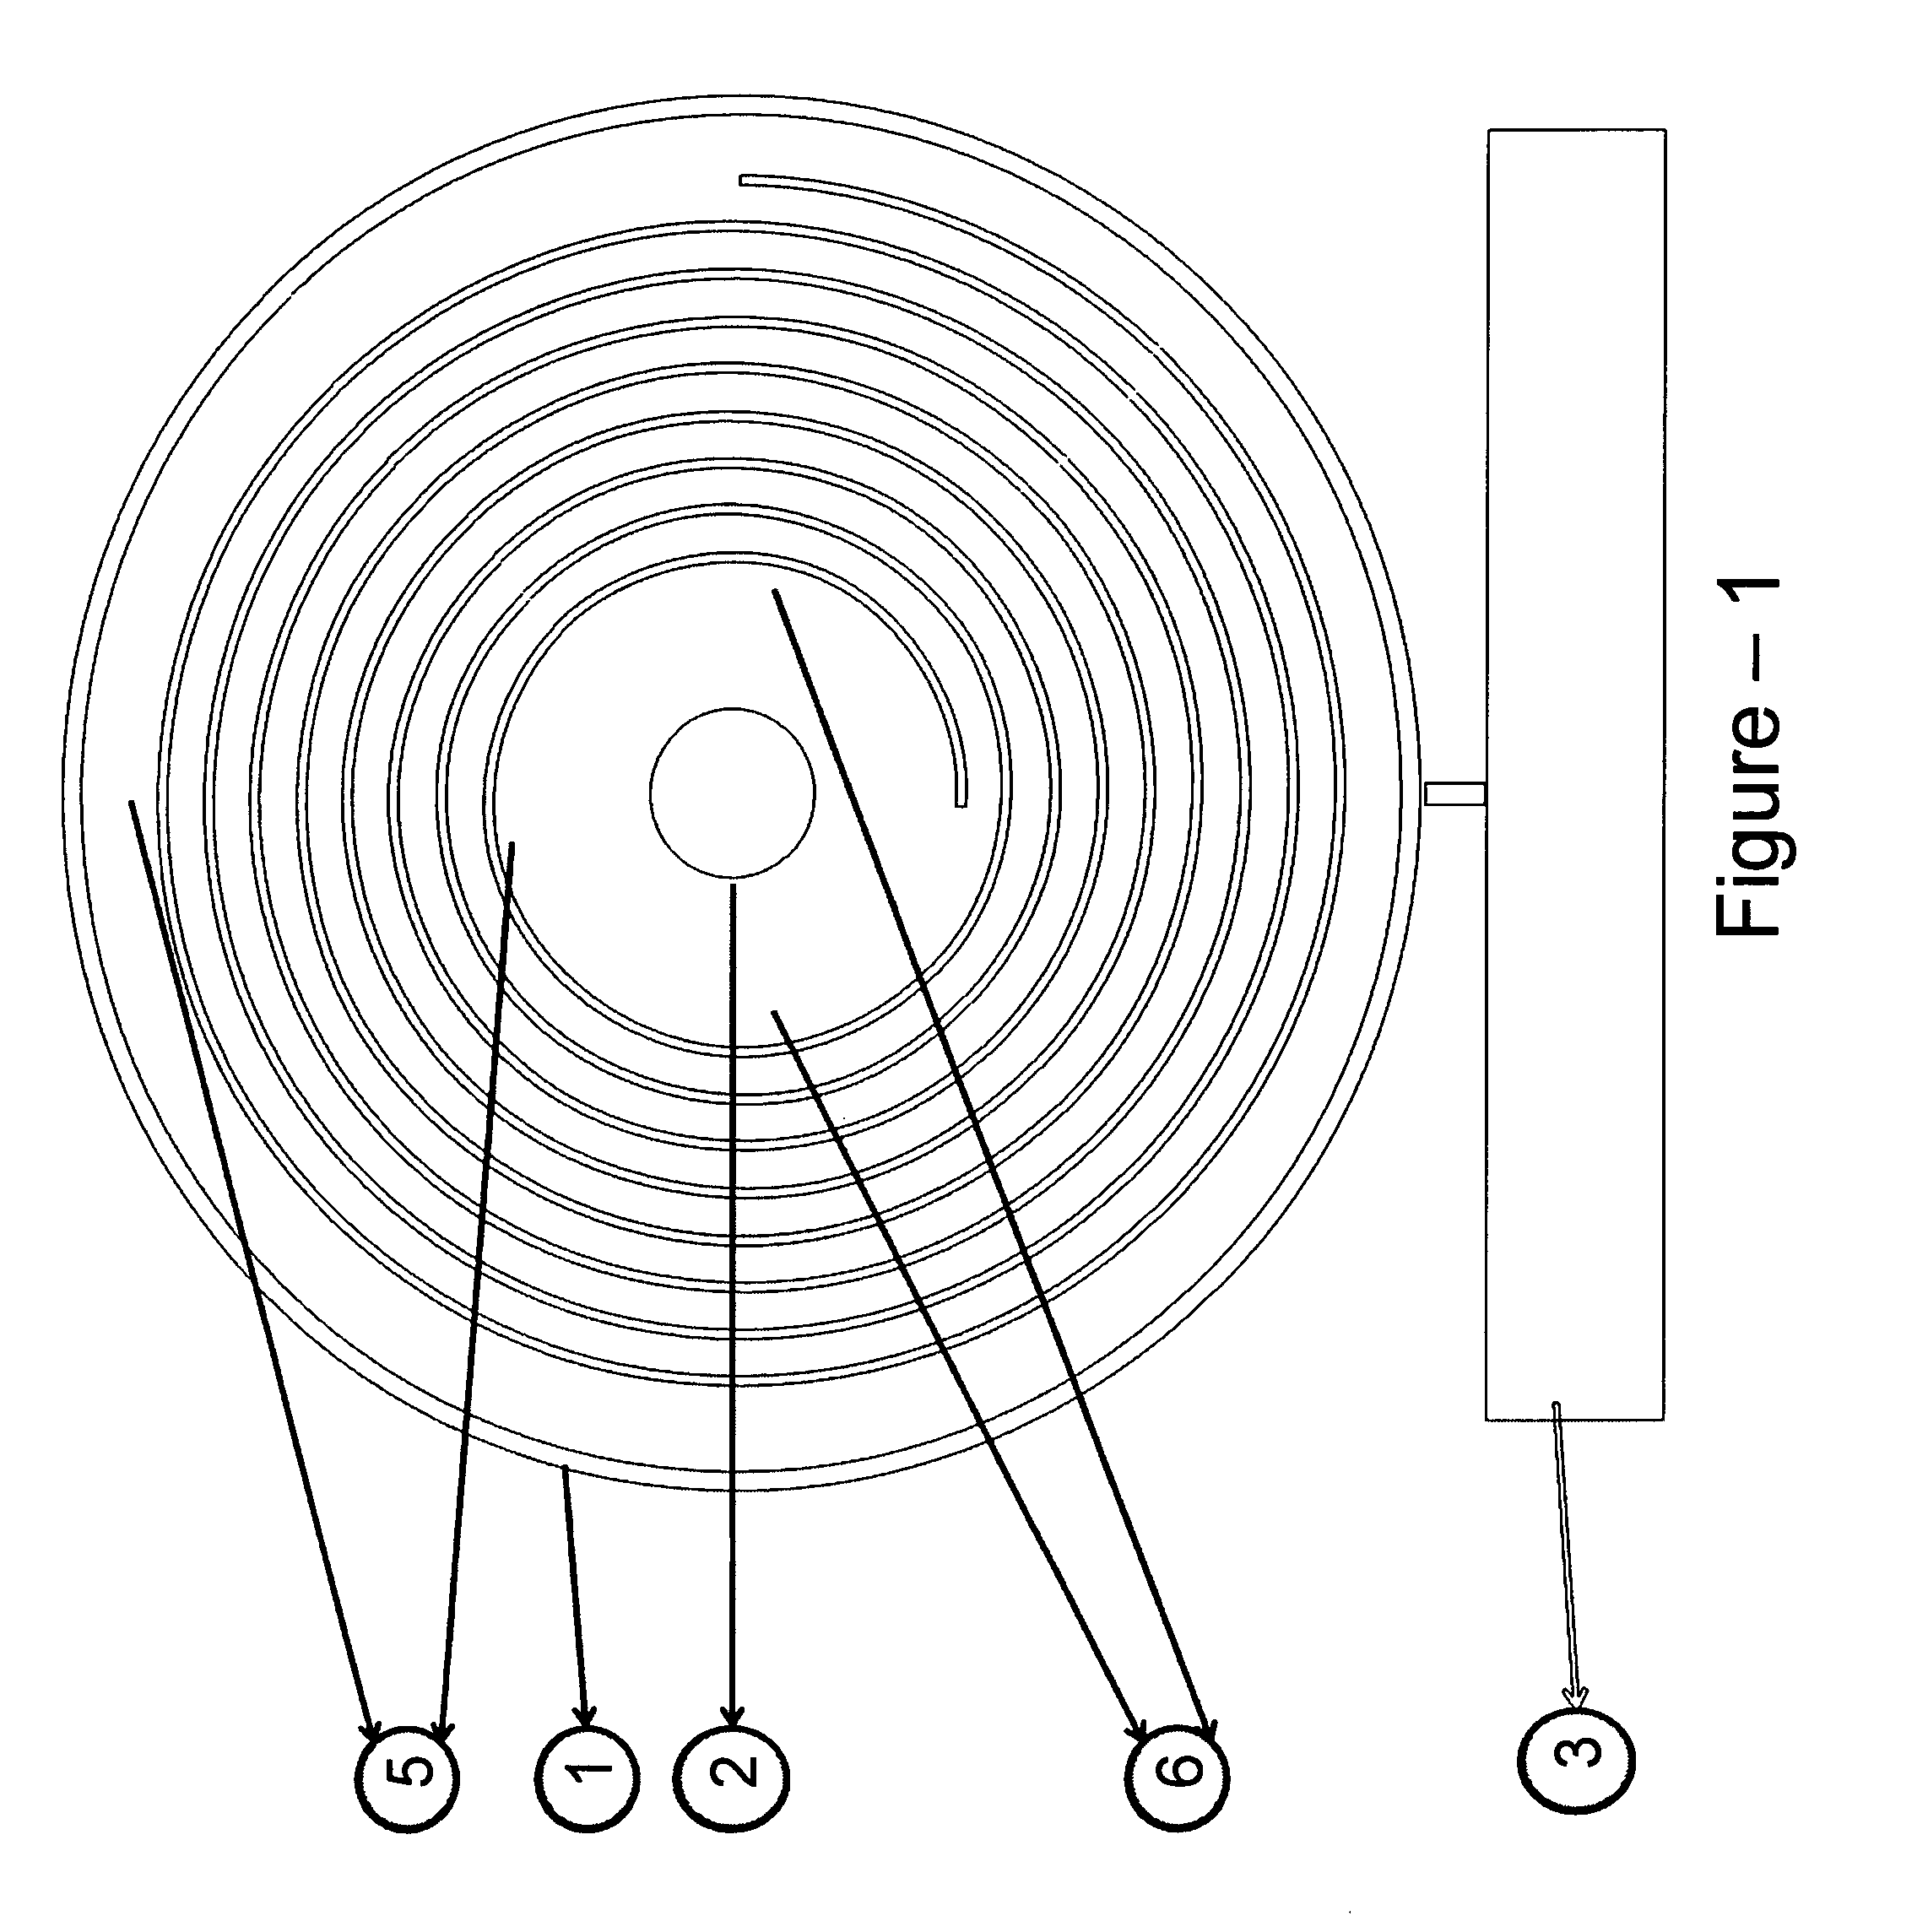 Dielectrophoretic cell chromatography device with spiral microfluidic channels and concentric electrodes, fabricated with MEMS technology